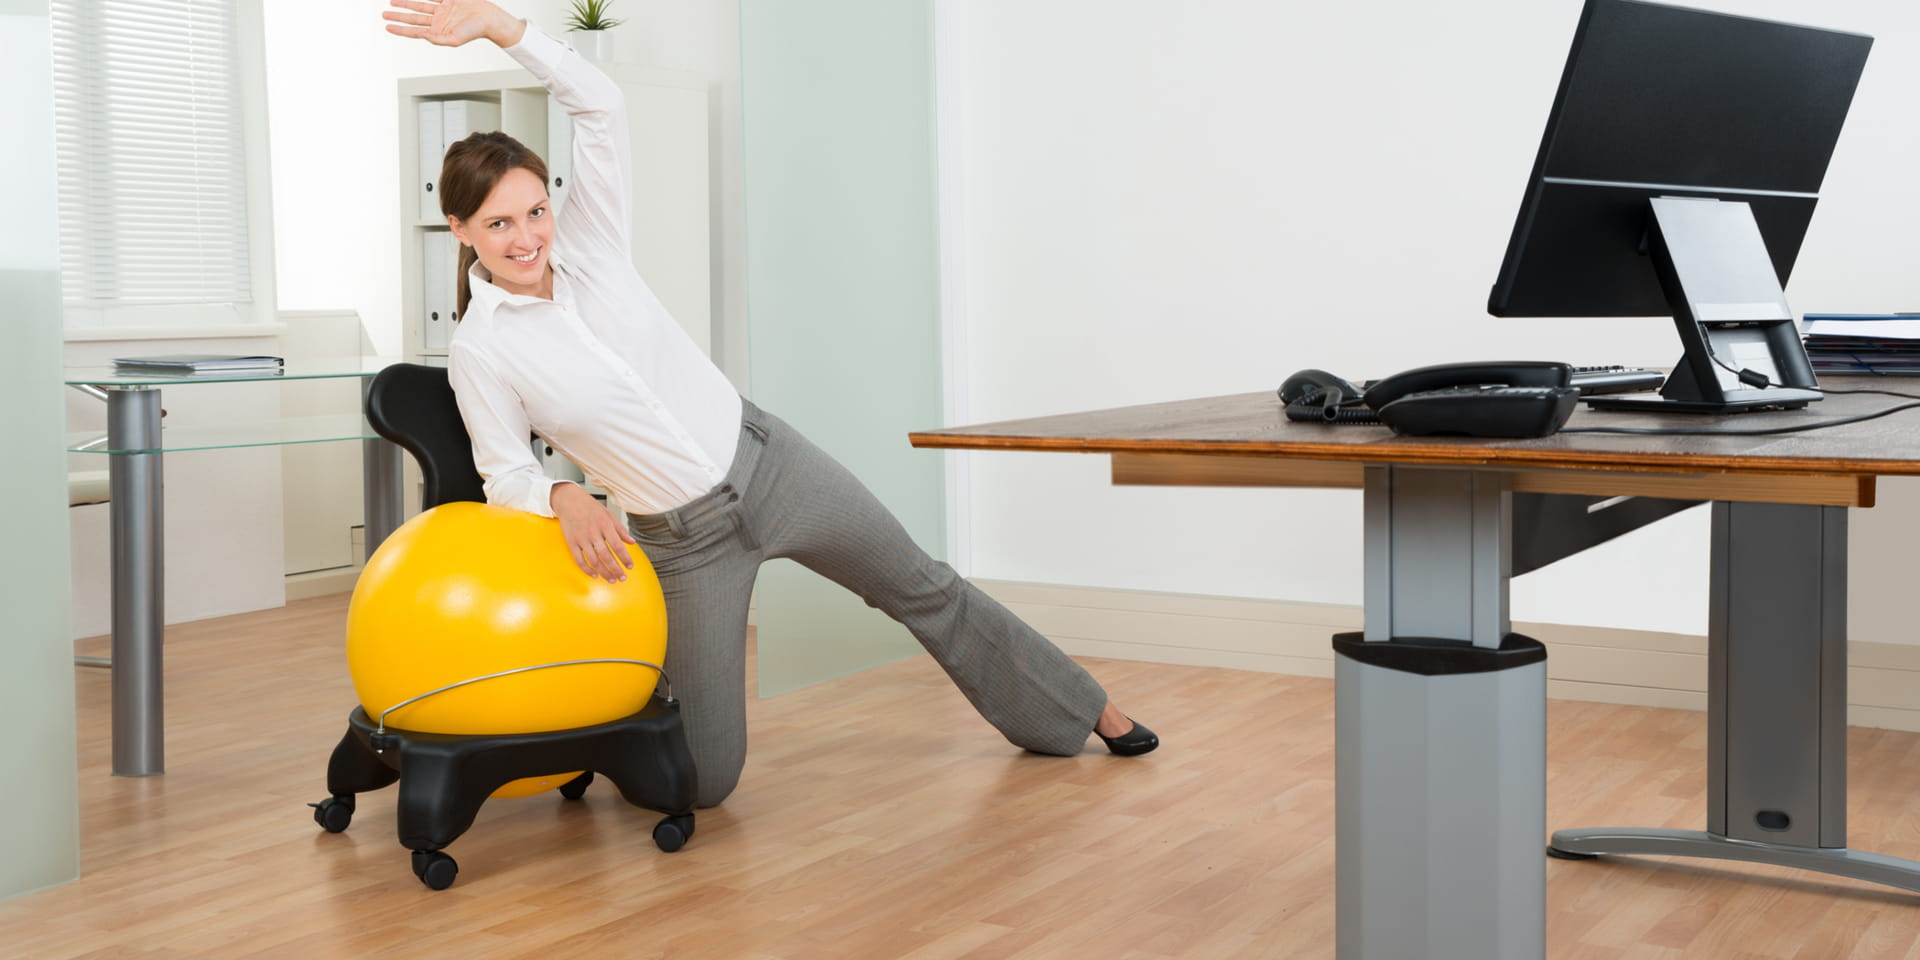 Woman uses exercise ball for stretches in her office where she also has a standing desk.